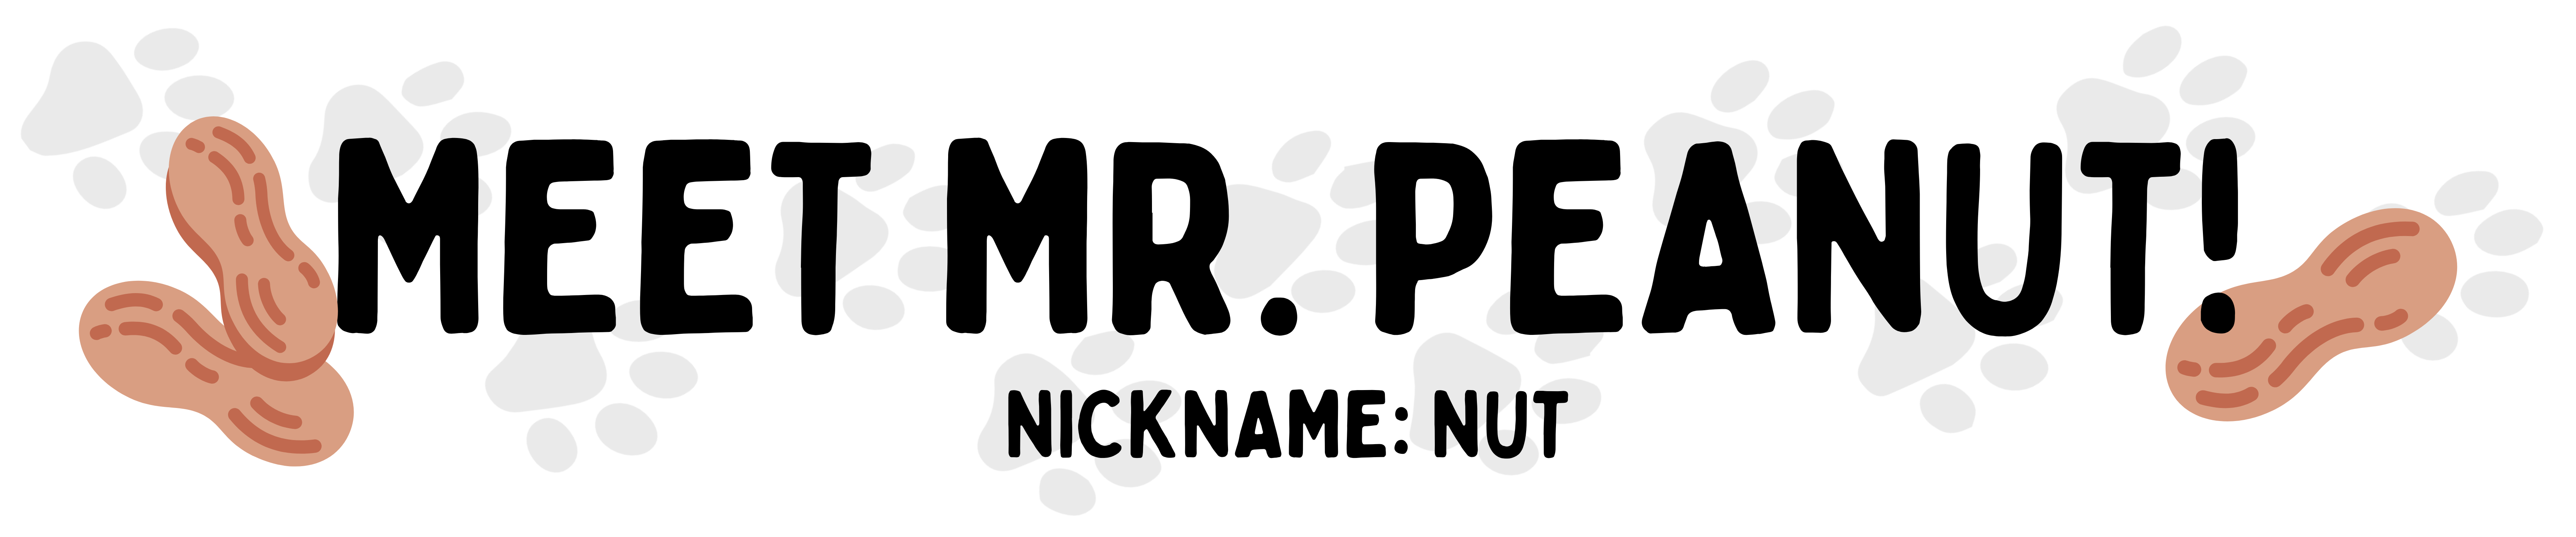 may's friendly pet of the month - mr. peanut